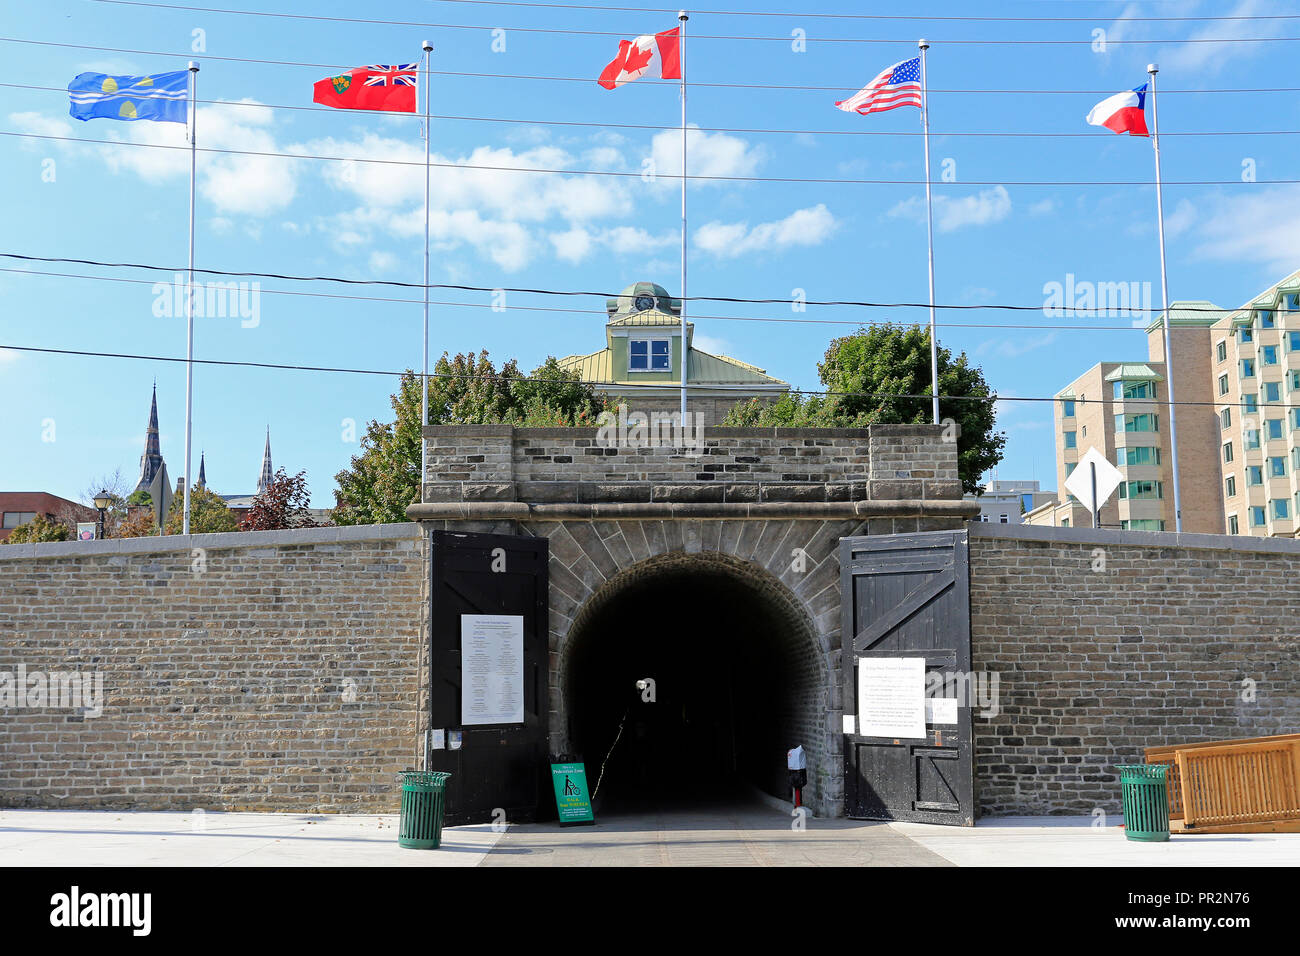 Canada's first railway tunnel at Brockville, Ontario, Canada Stock Photo